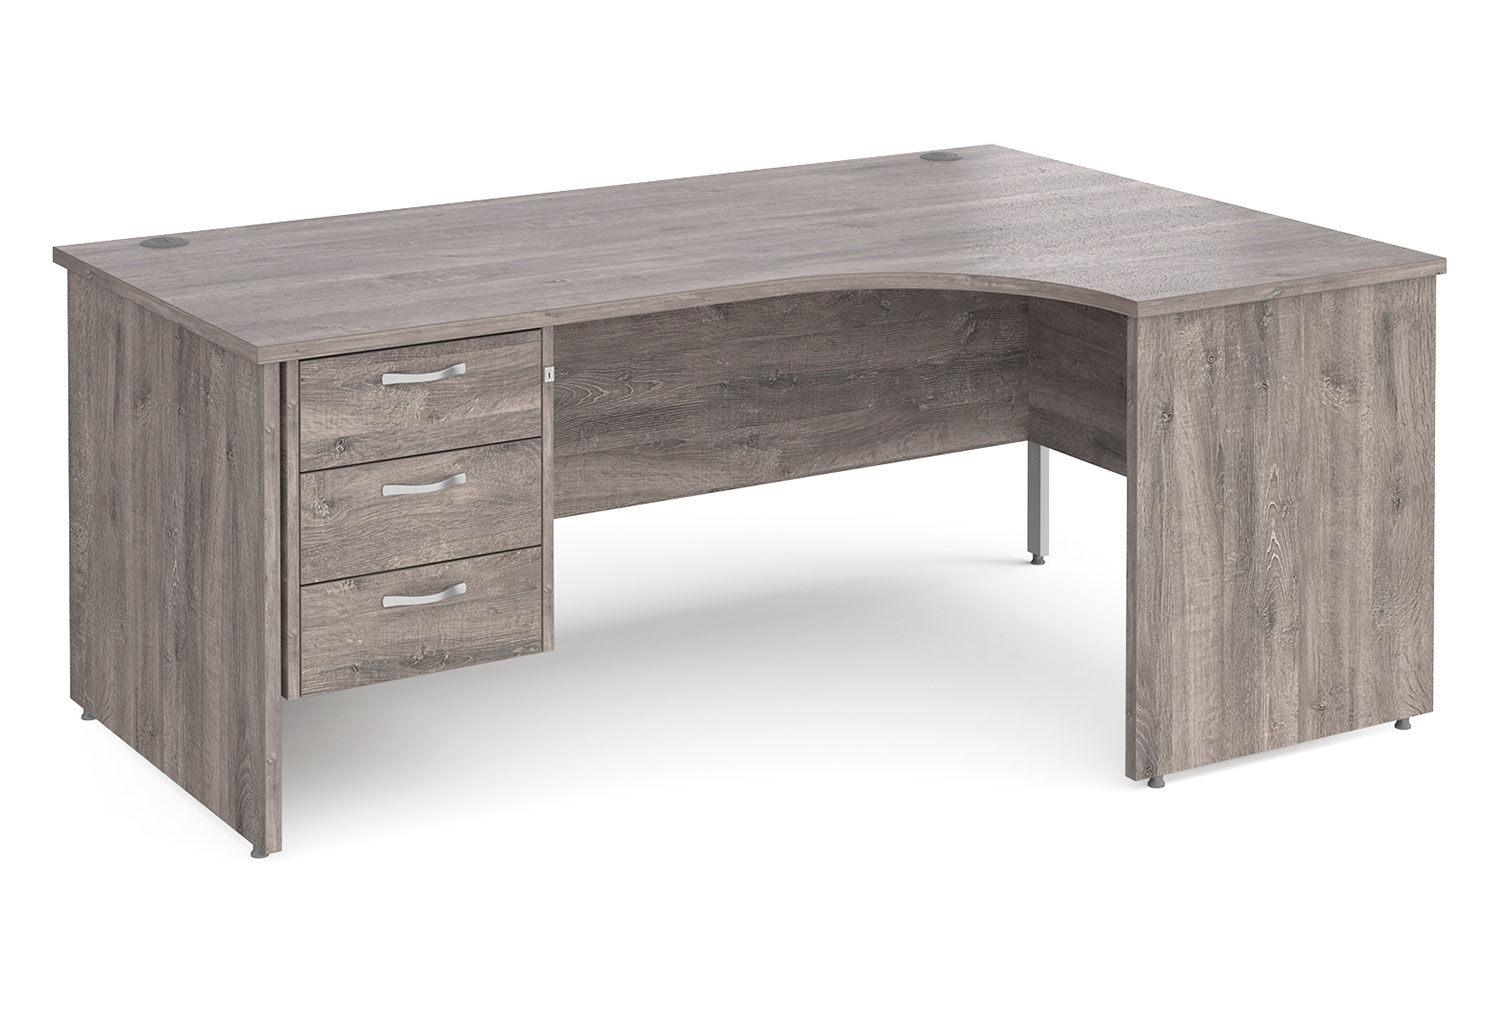 Tully Panel End Right Hand Ergonomic Office Desk 3 Drawers, 180wx120/80dx73h (cm), Grey Oak, Express Delivery